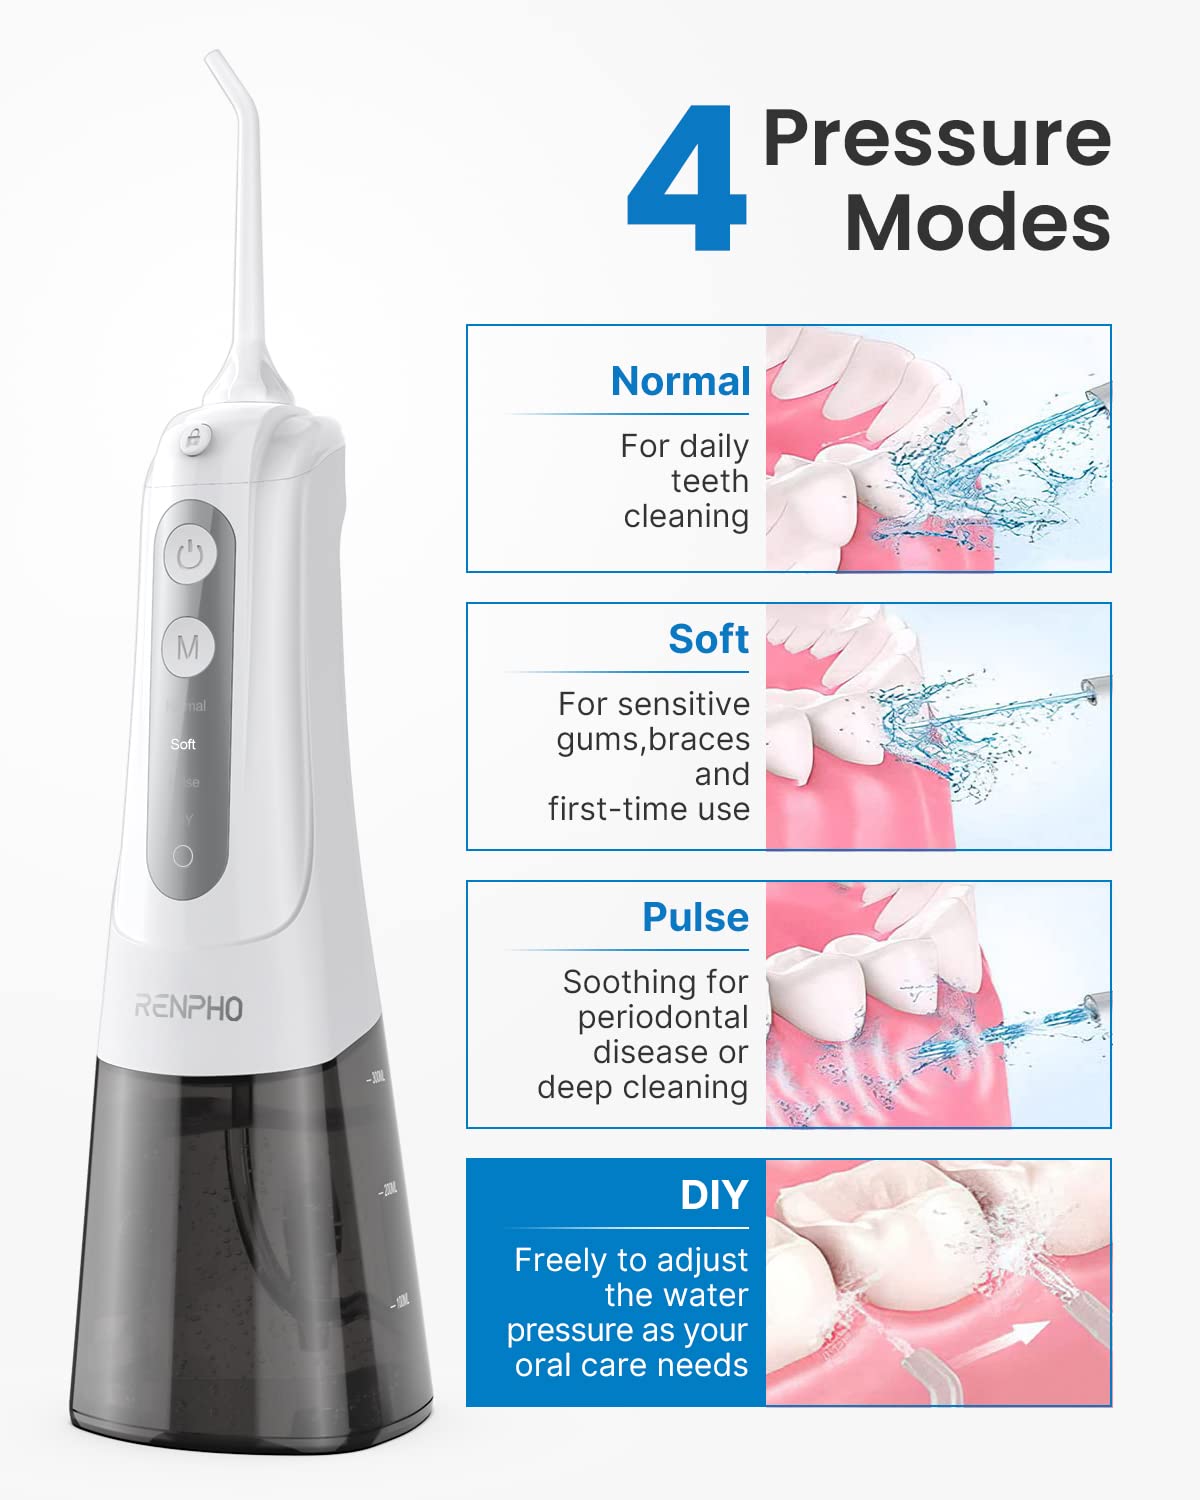 RENPHO Portable Rechargeable Water Flosser Oral Irrigator, White - image 3 of 8